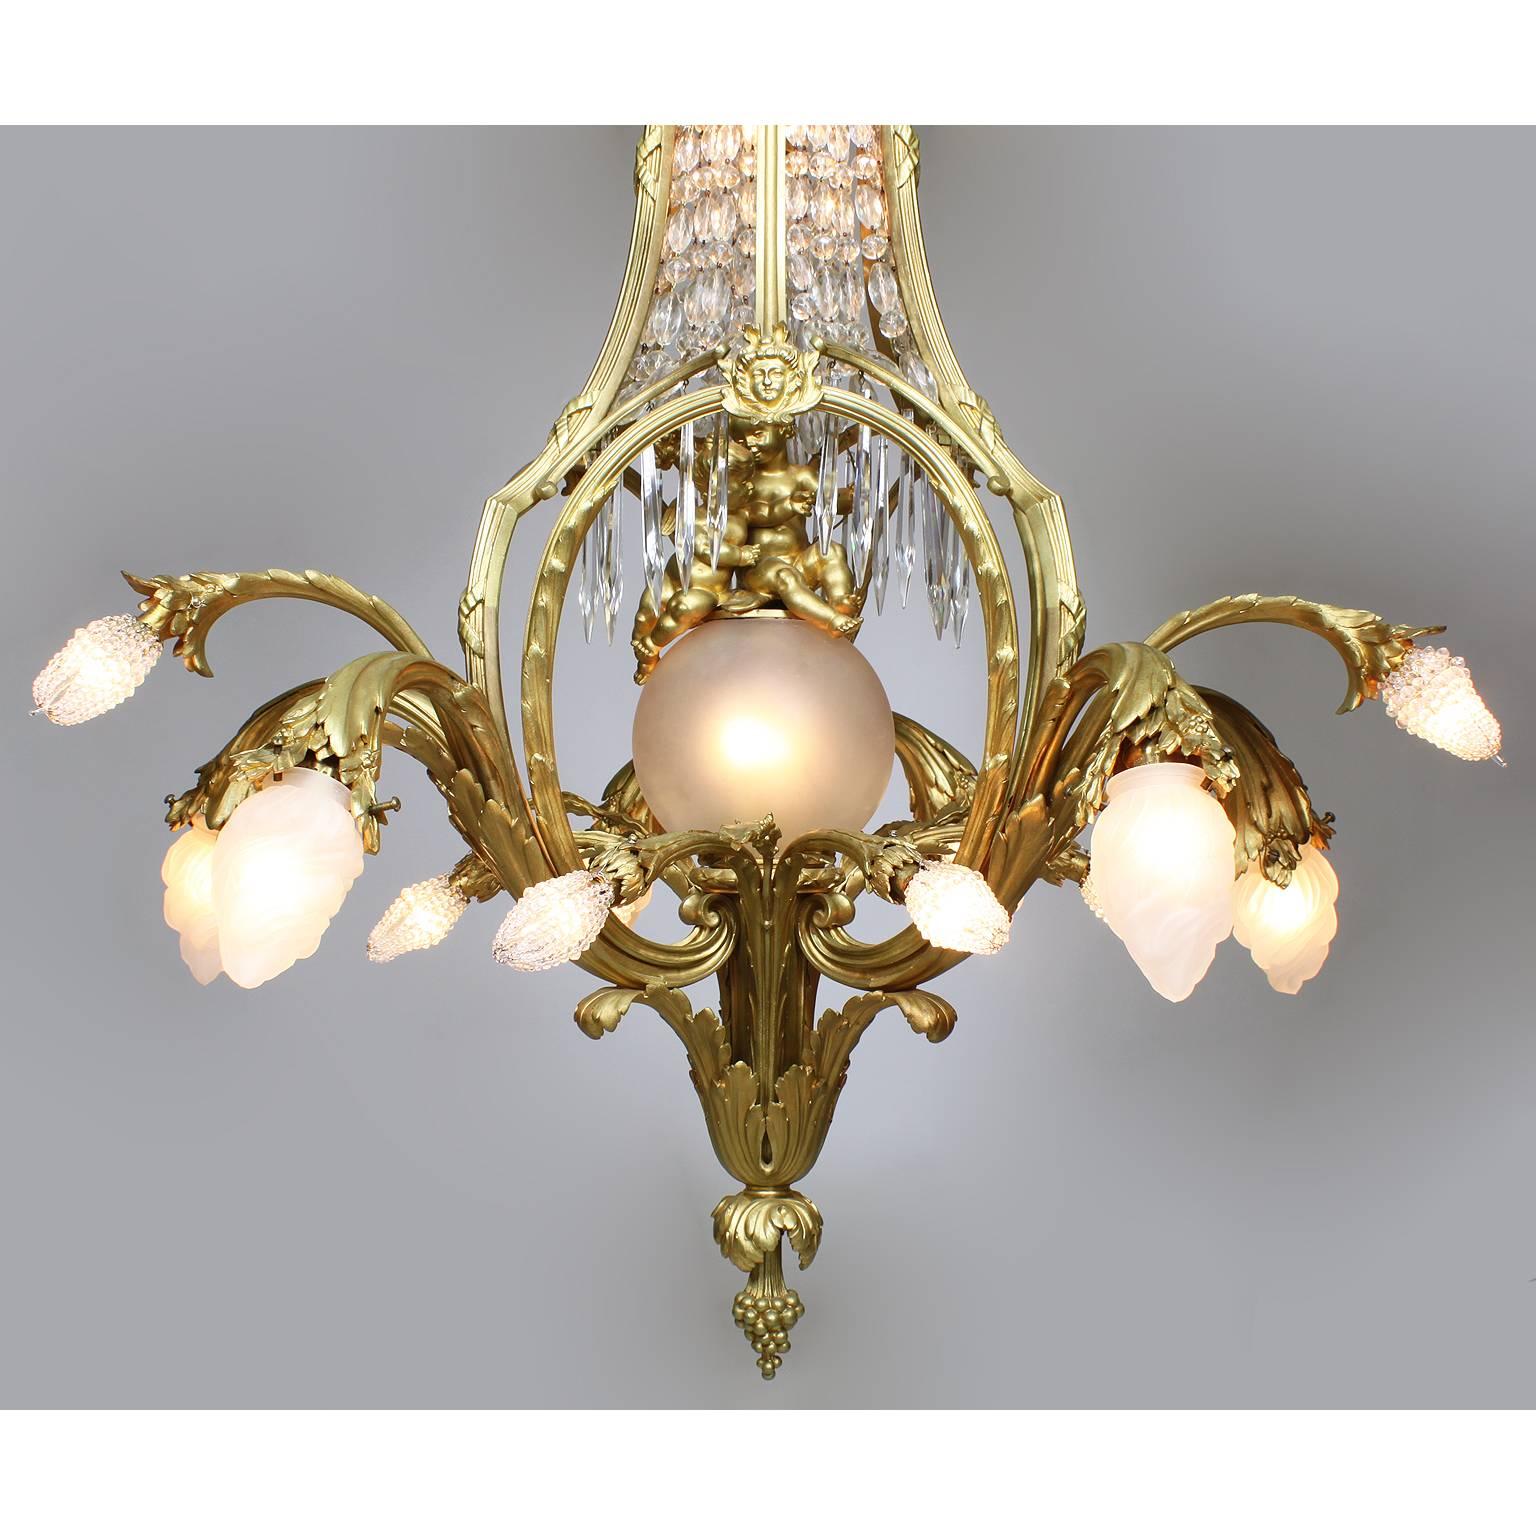 A large and rare French Belle Époque gilt bronze and cut-glass twenty-four light figural chandelier. The elongated gilt bronze frame with scrolled floral arms protruding from the lower section with frosted glass shades and beaded glass bulb covers;